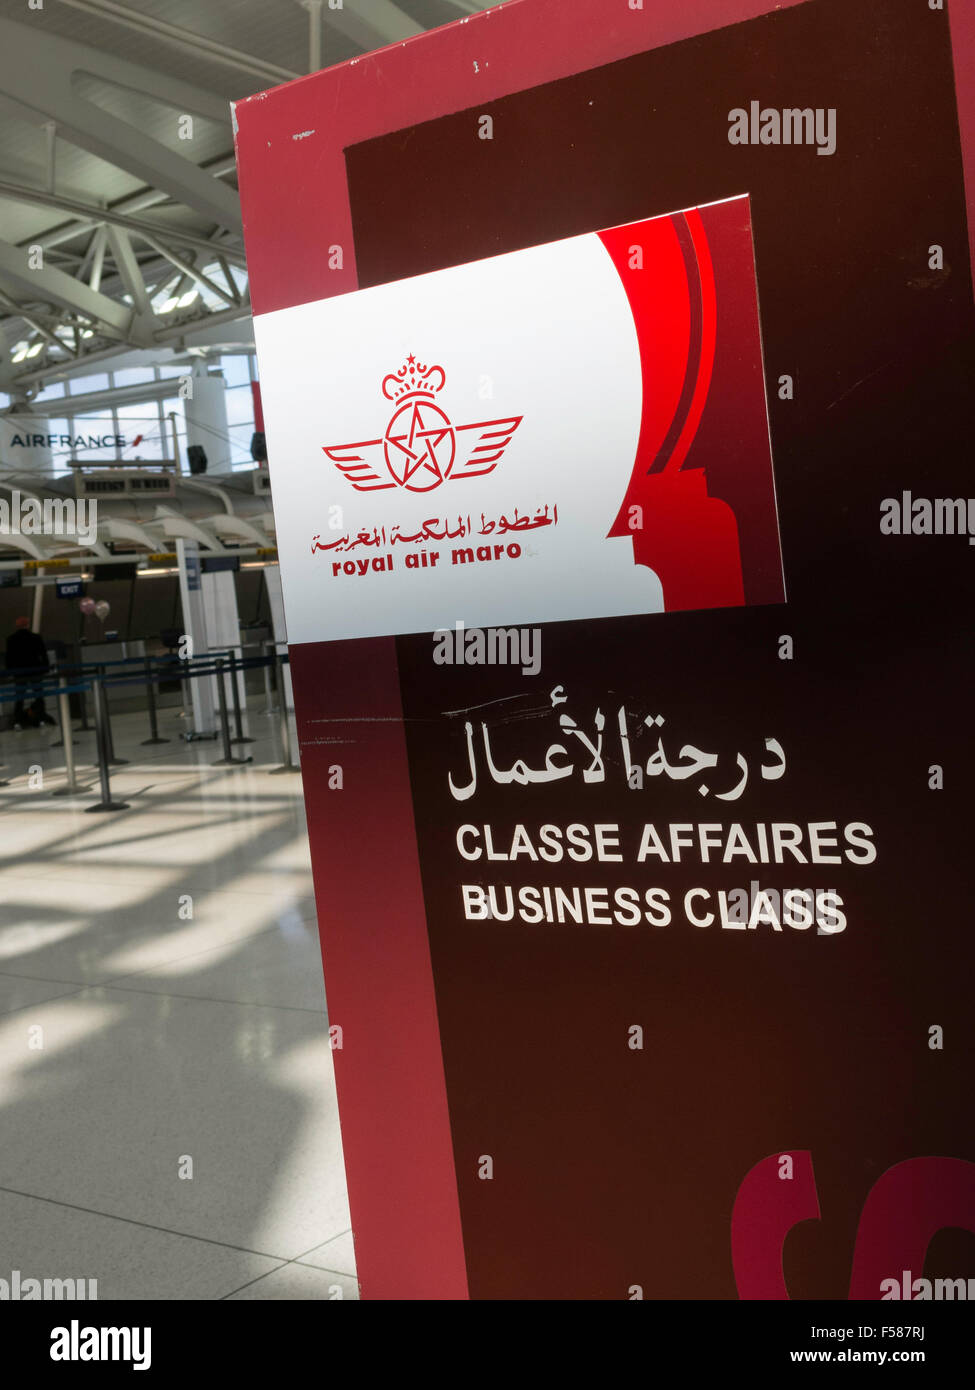 Business Class Check-In Sign, Royal Air Maroc Airline, International Terminal,John F. Kennedy International Airport, New York Stock Photo